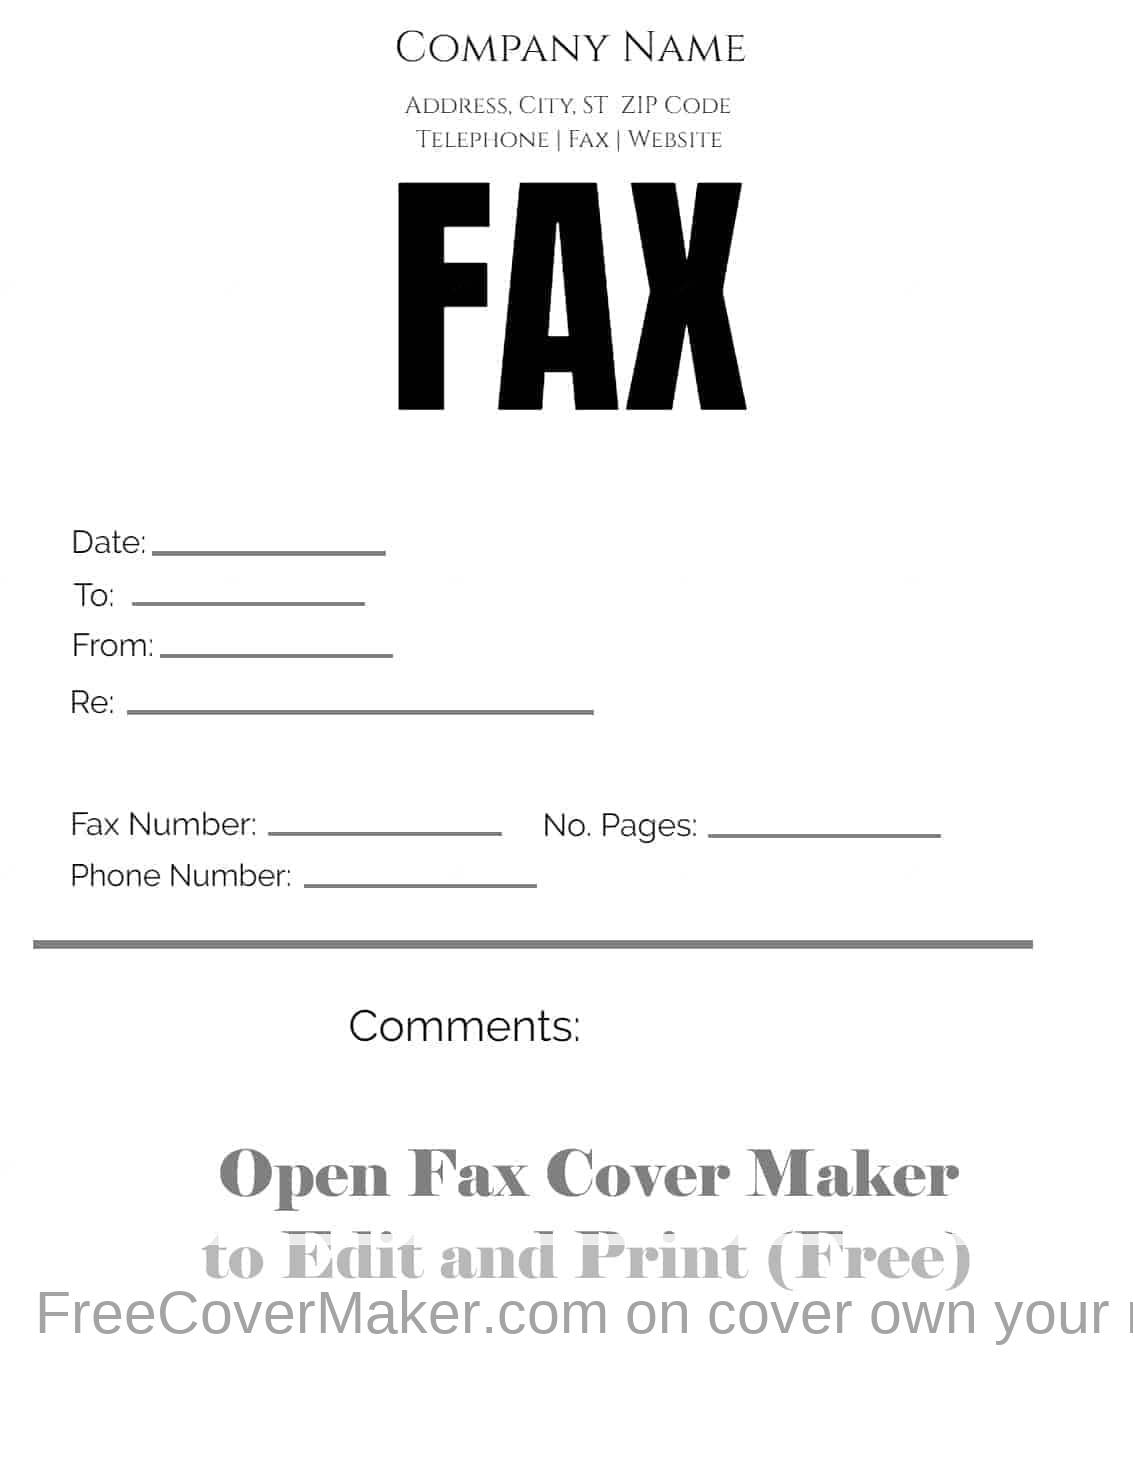 Free fax cover sheet Customize online then print